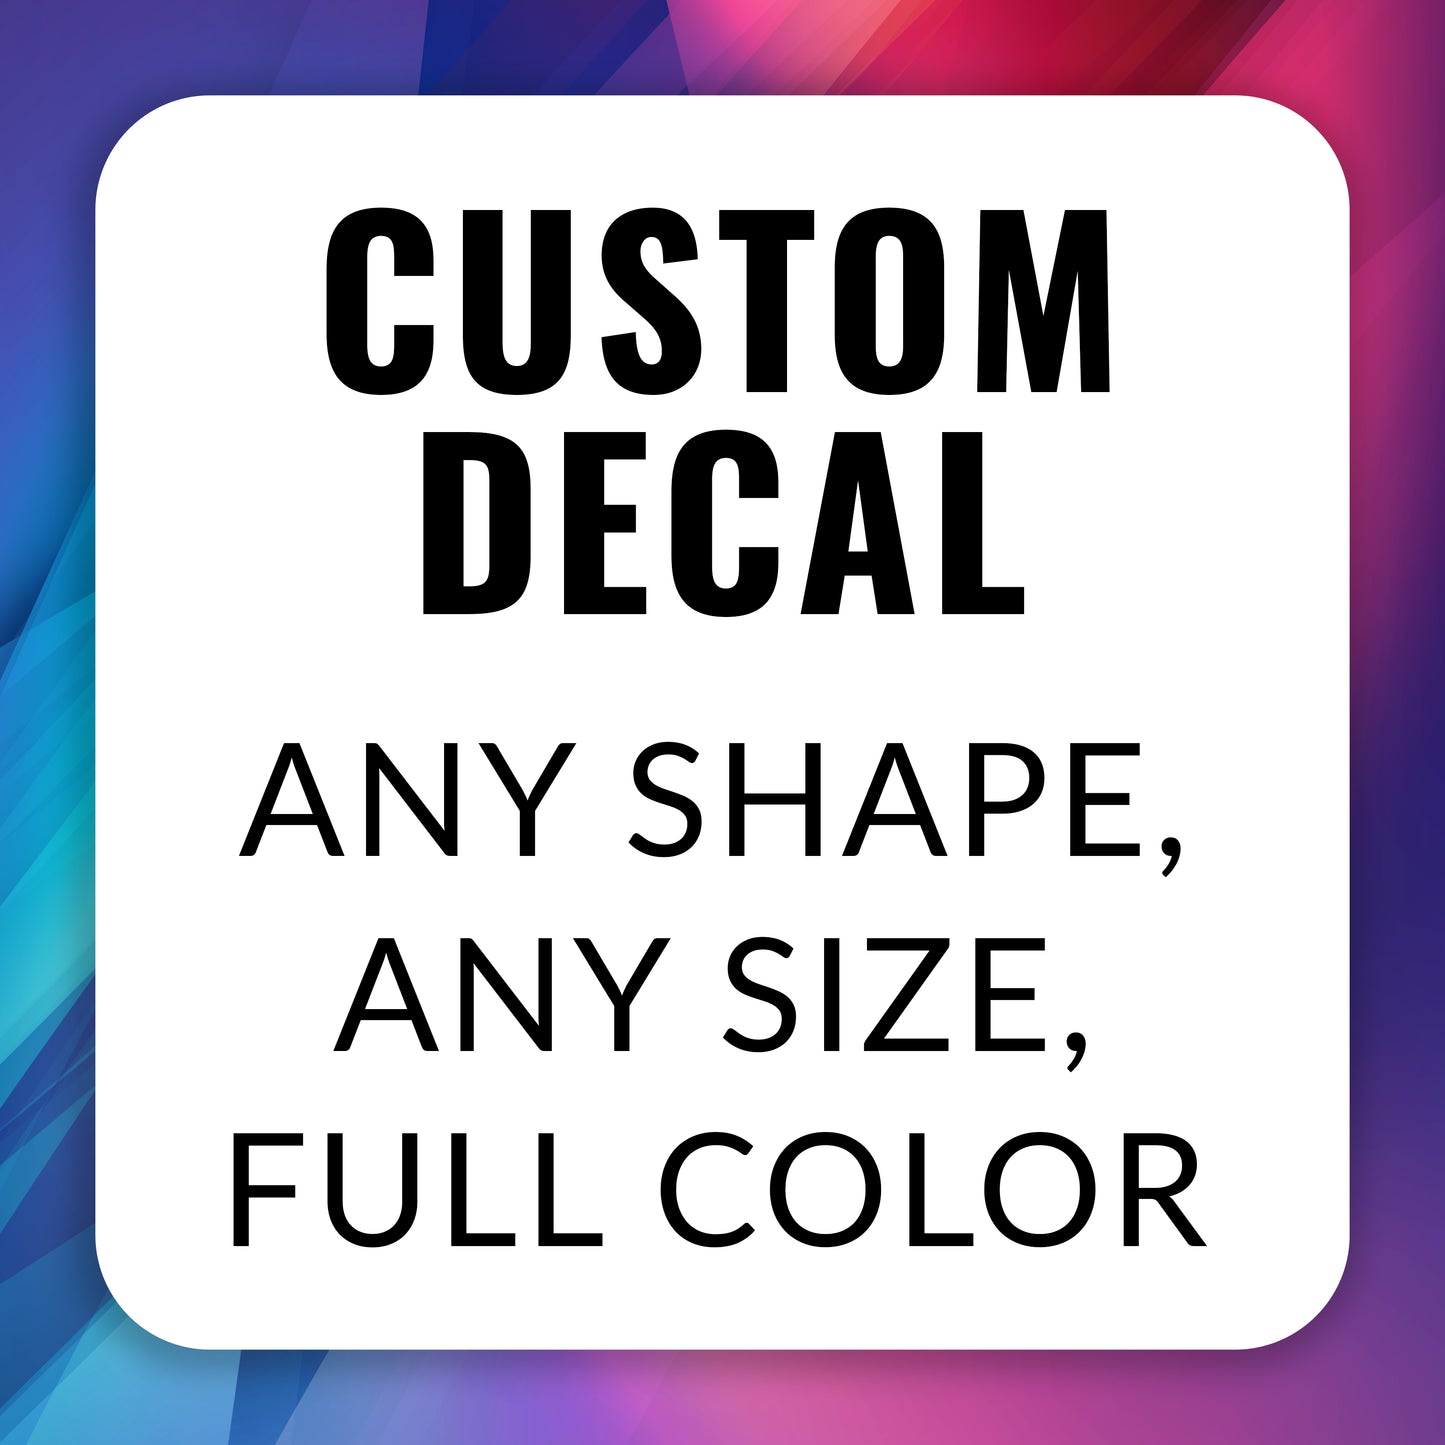 Custom Decal - can be any shape, size, or full color.